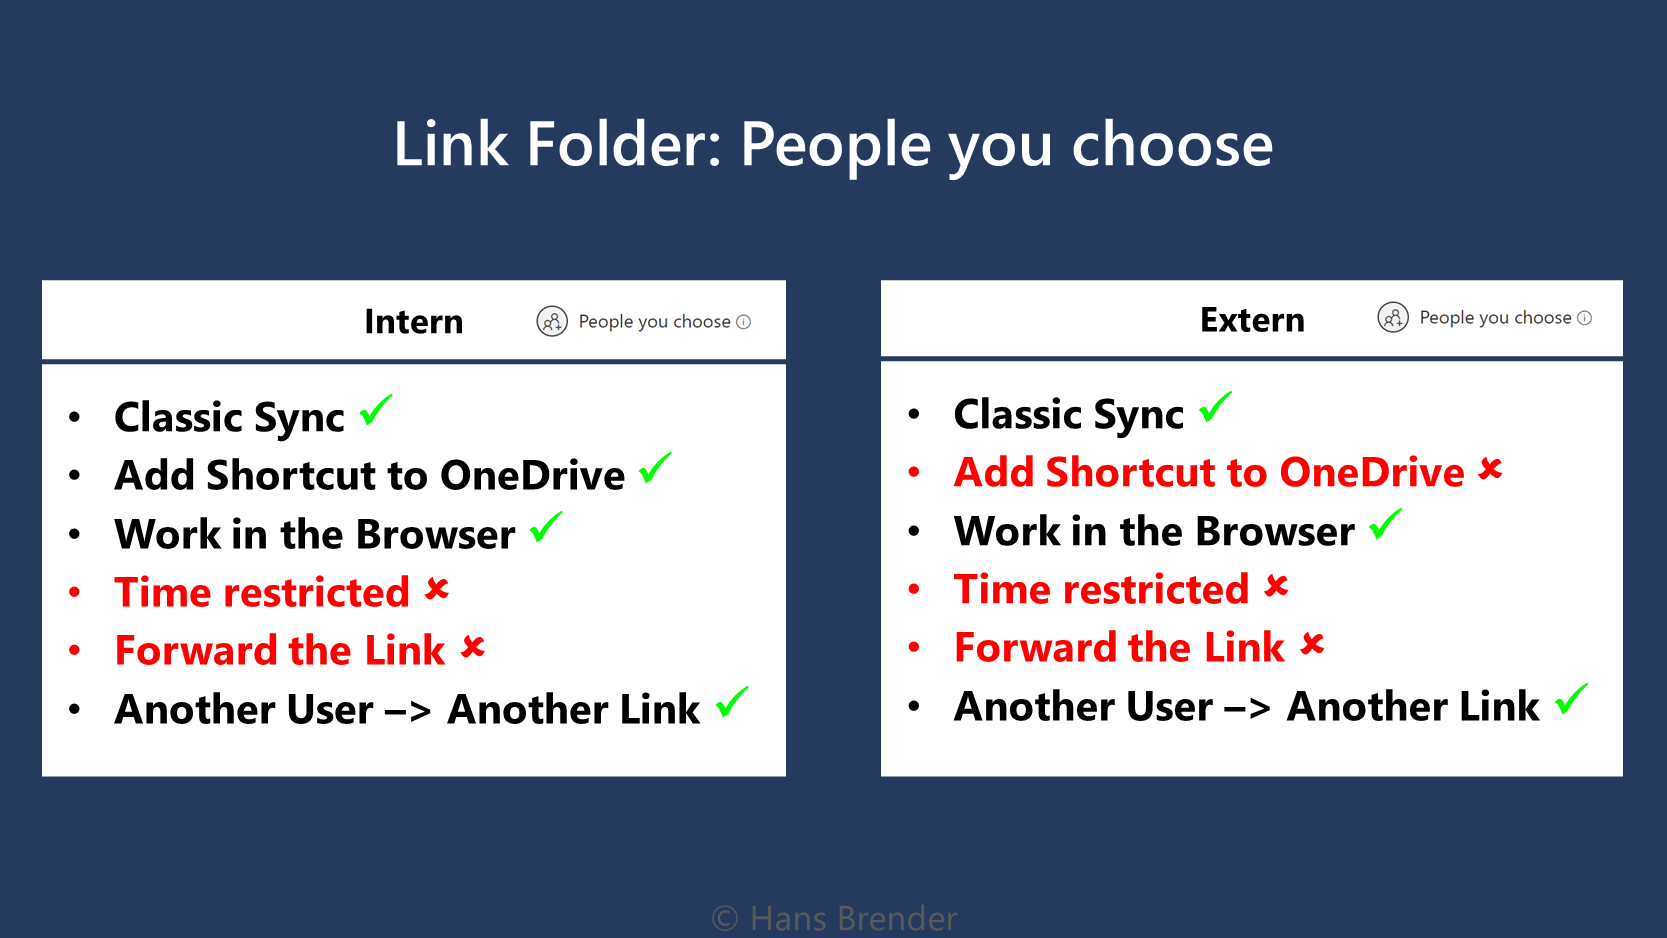 Alt: The Picture shows what is possible or not possible when you share a folder with the people you choose link.